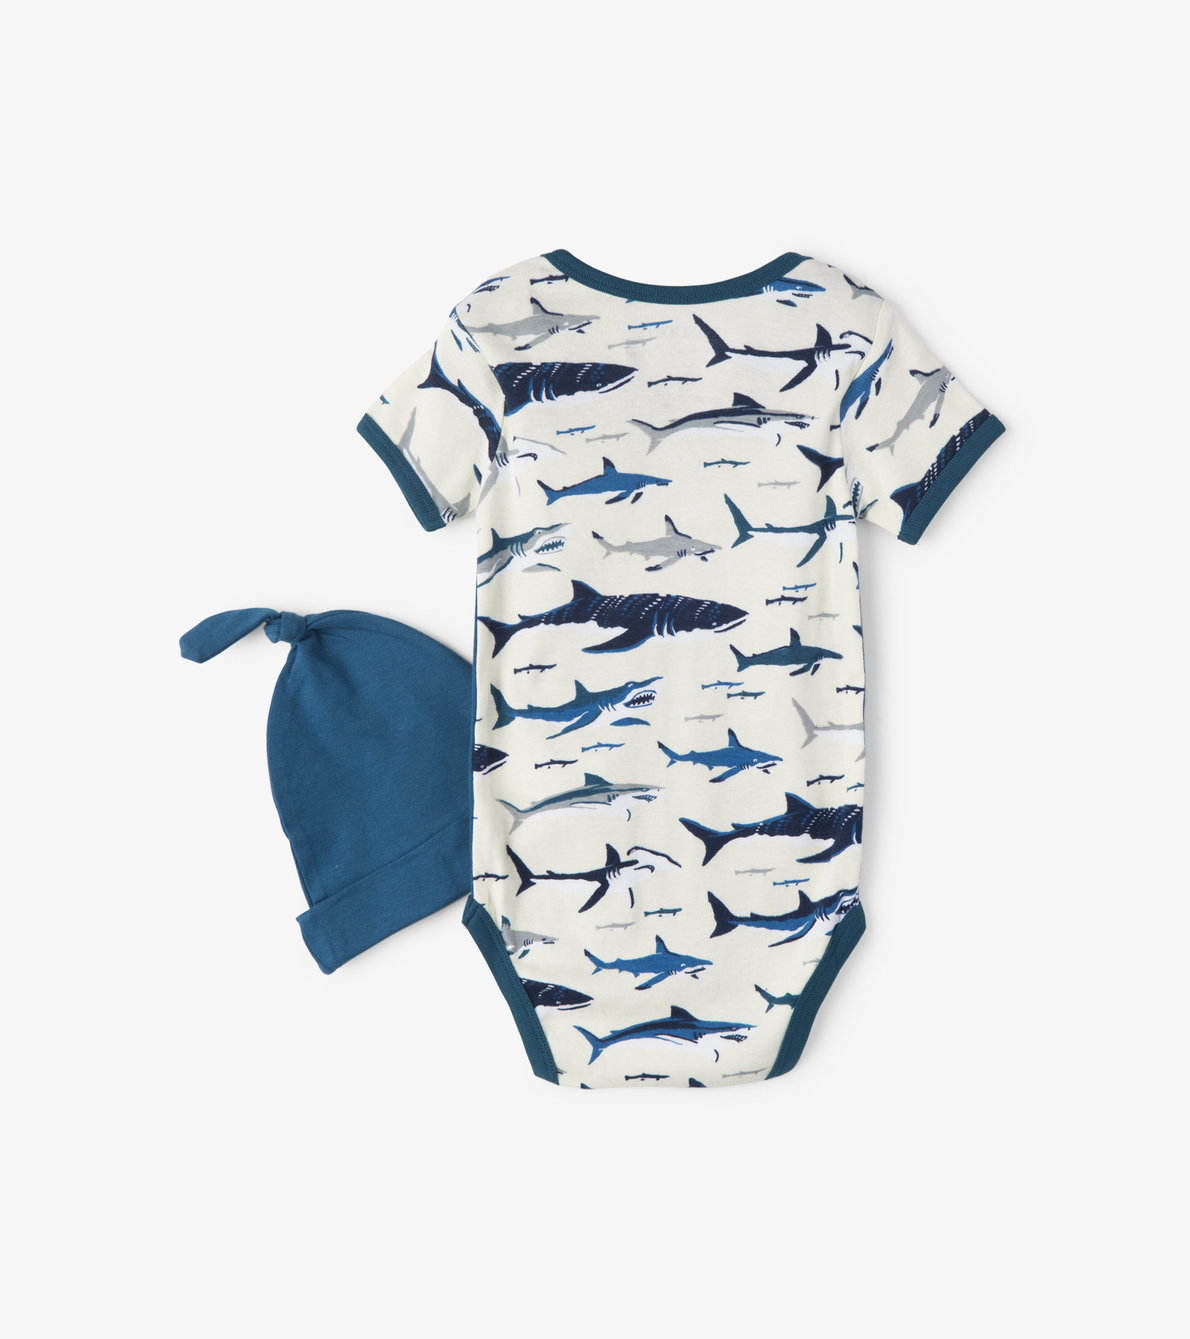 View larger image of Toothy Sharks Baby Bodysuit with Hat